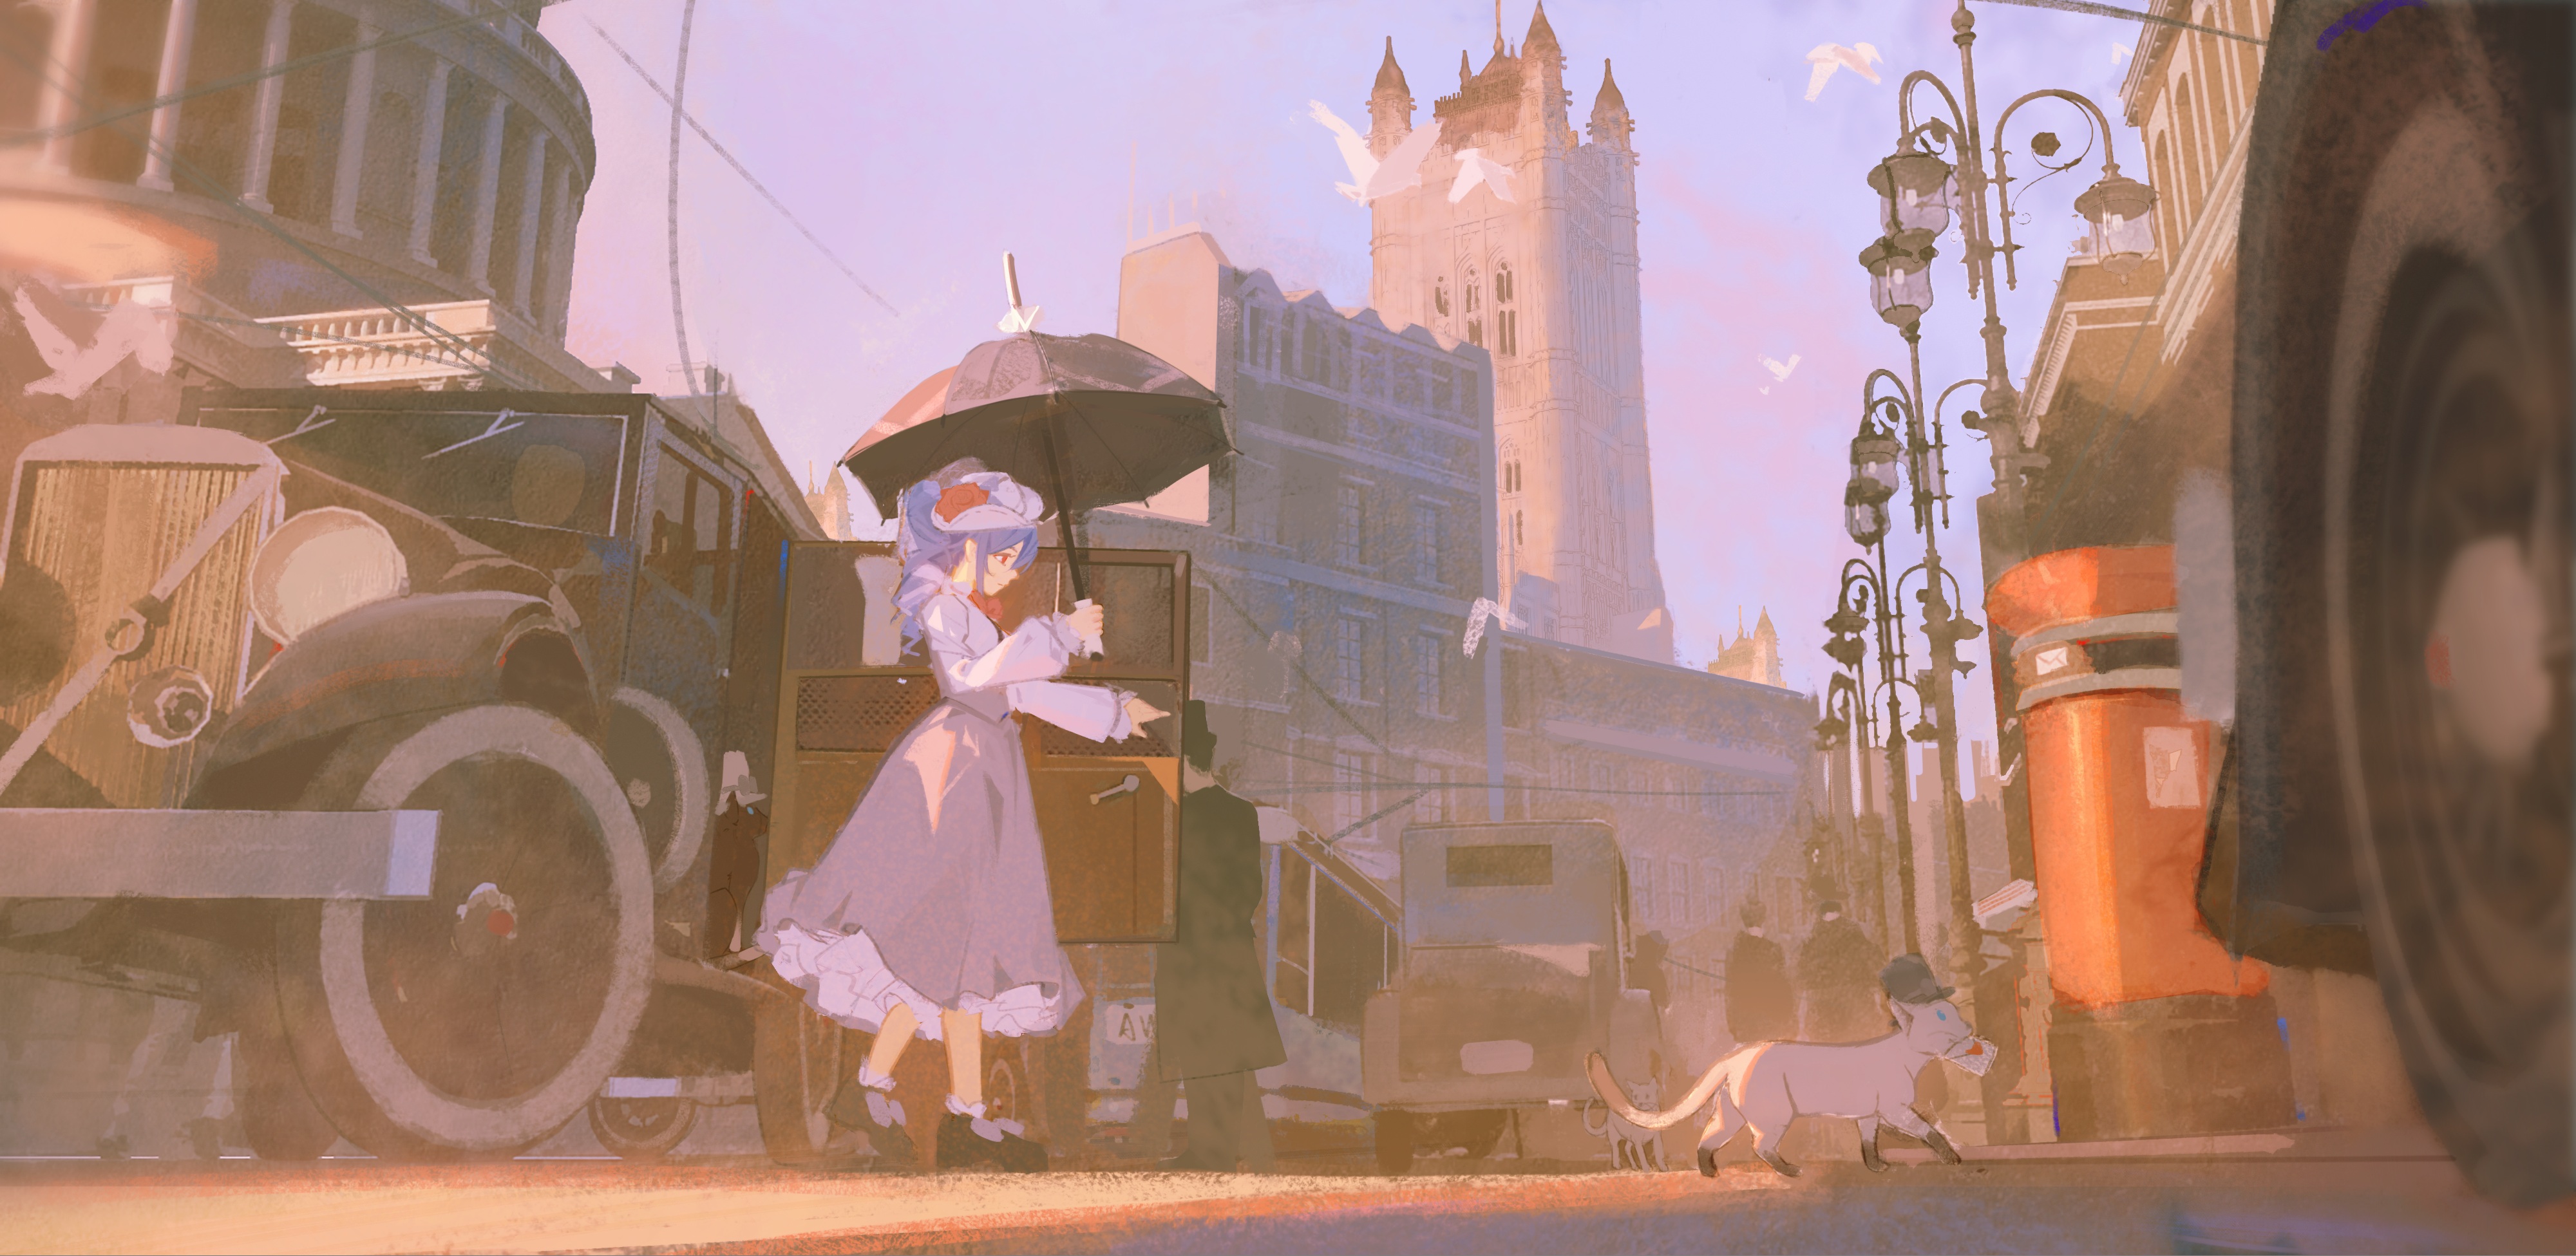 Anime Anime Girls Women With Cars Car Women With Umbrella Vehicle Oldtimers Dress City Cats Animals  4000x1951